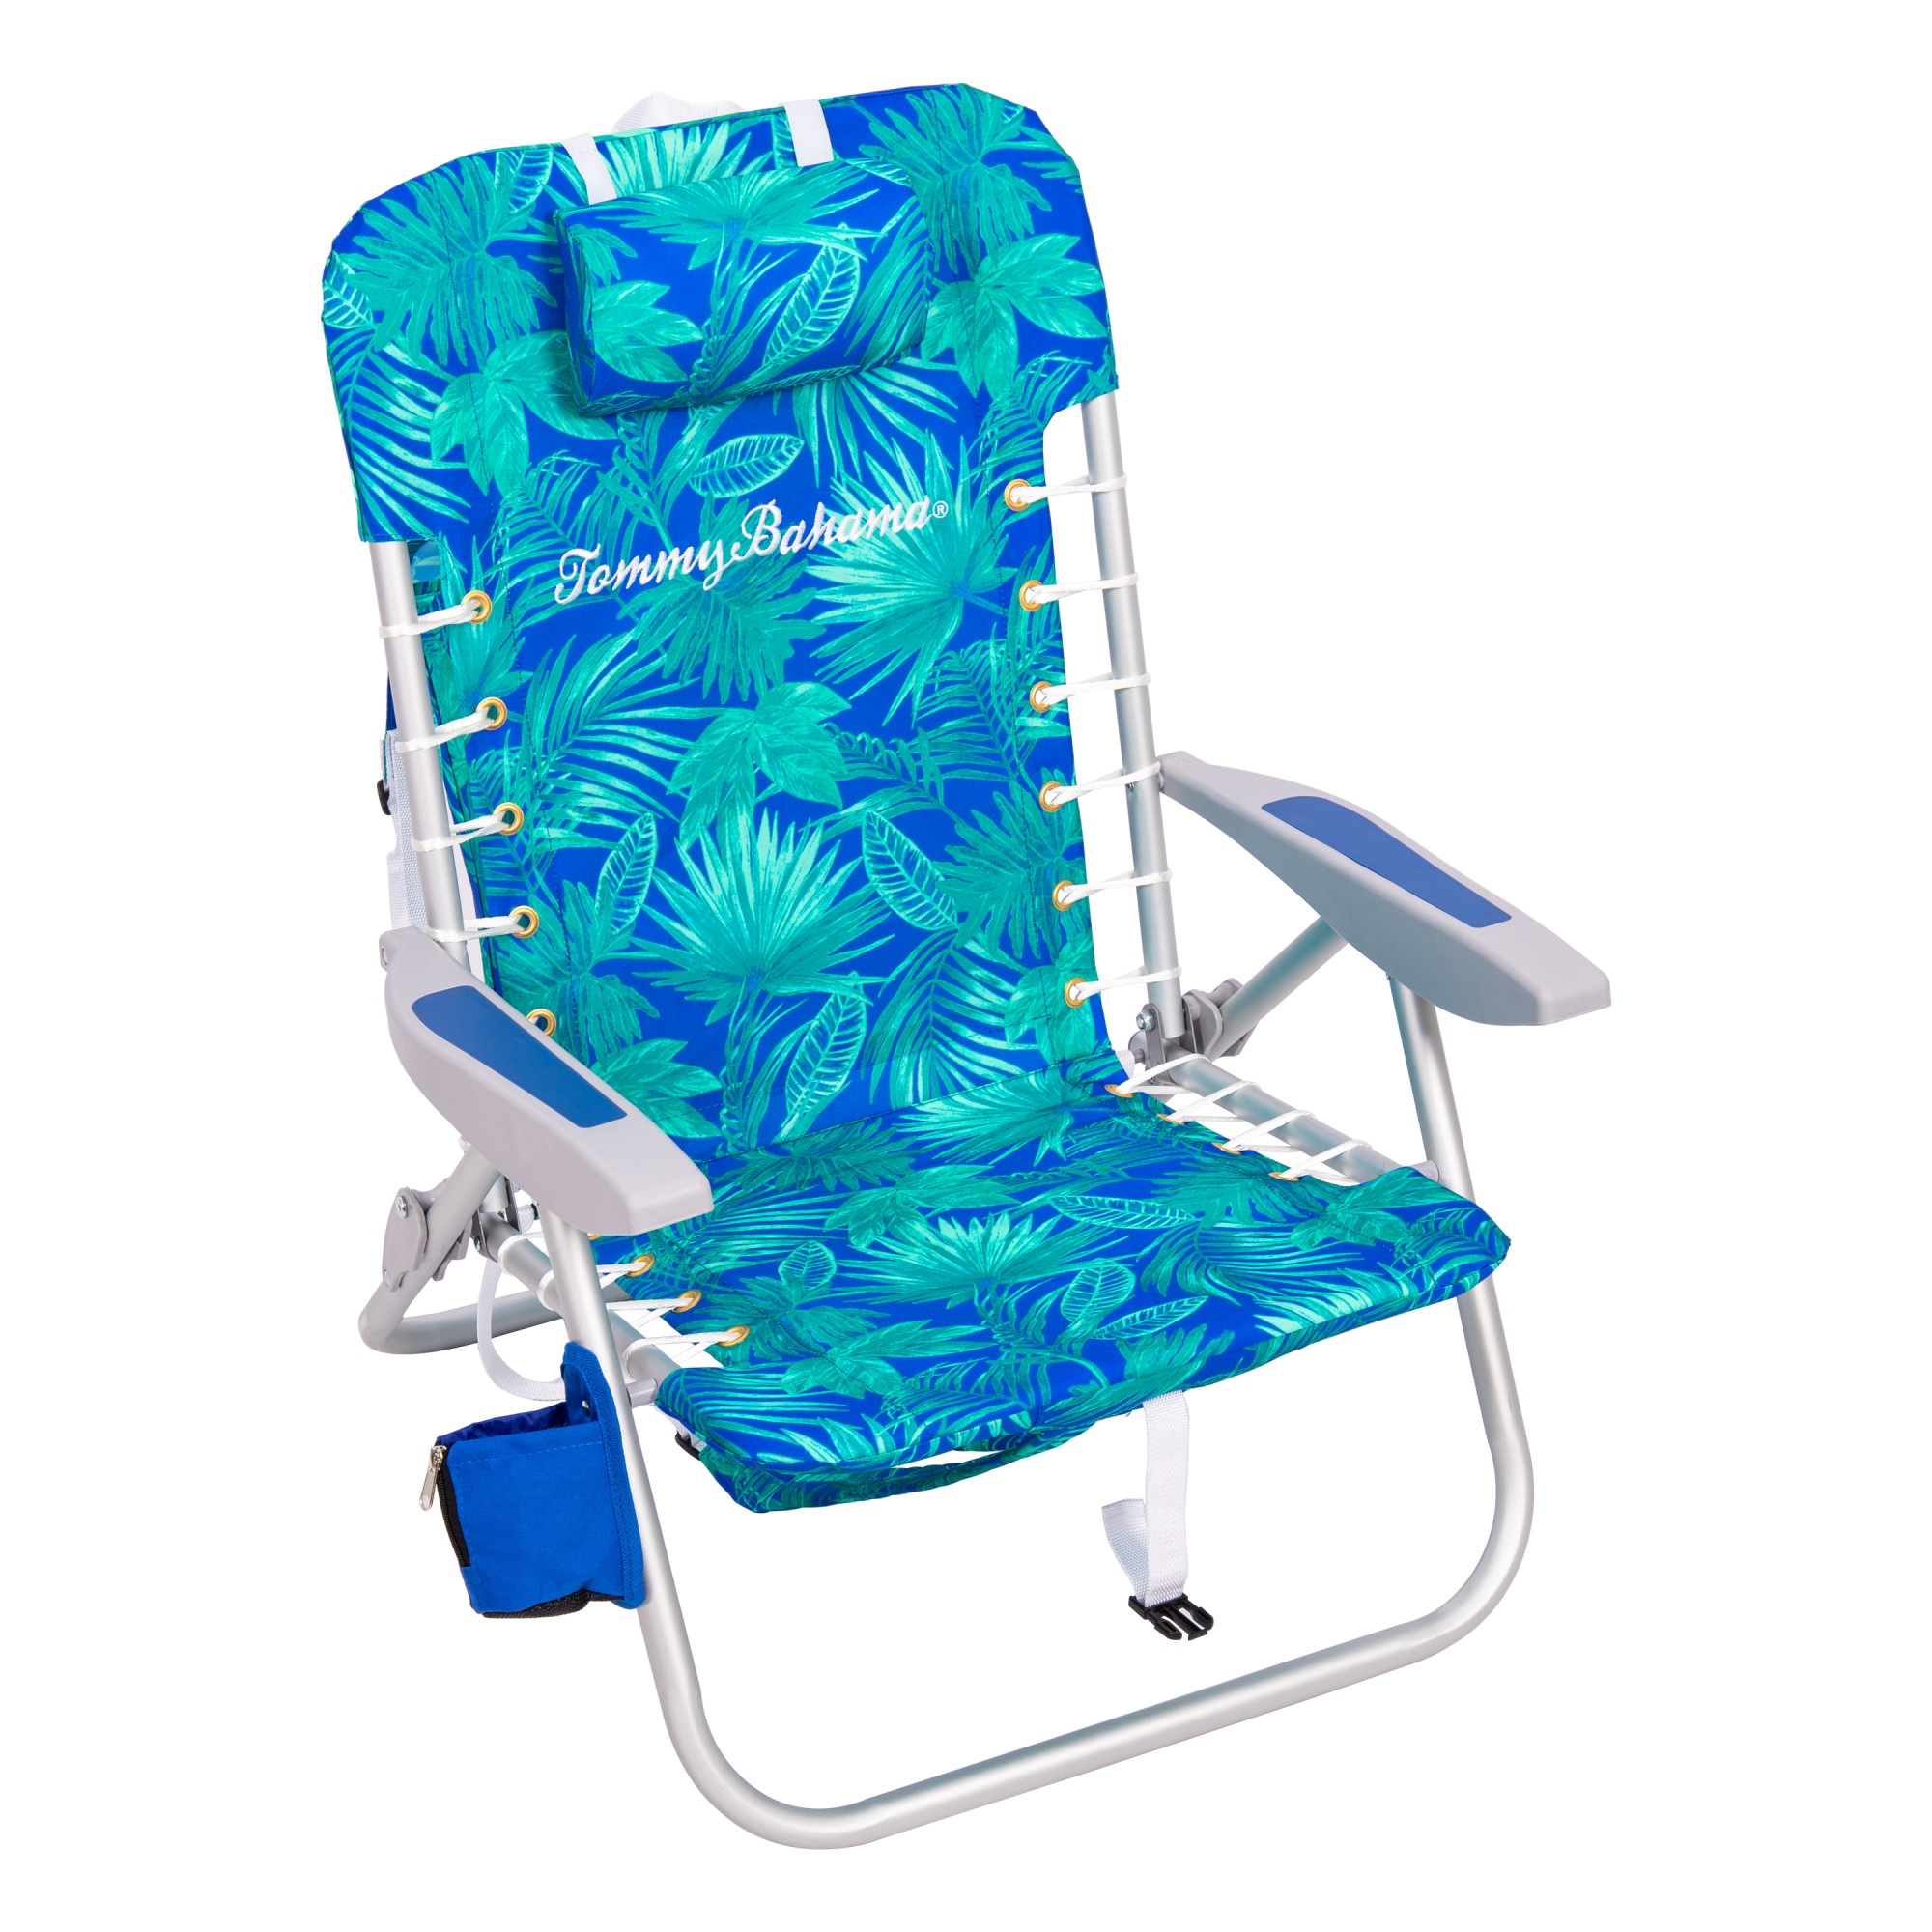 Wholesale beach chair storage bag In A Variety Of Designs